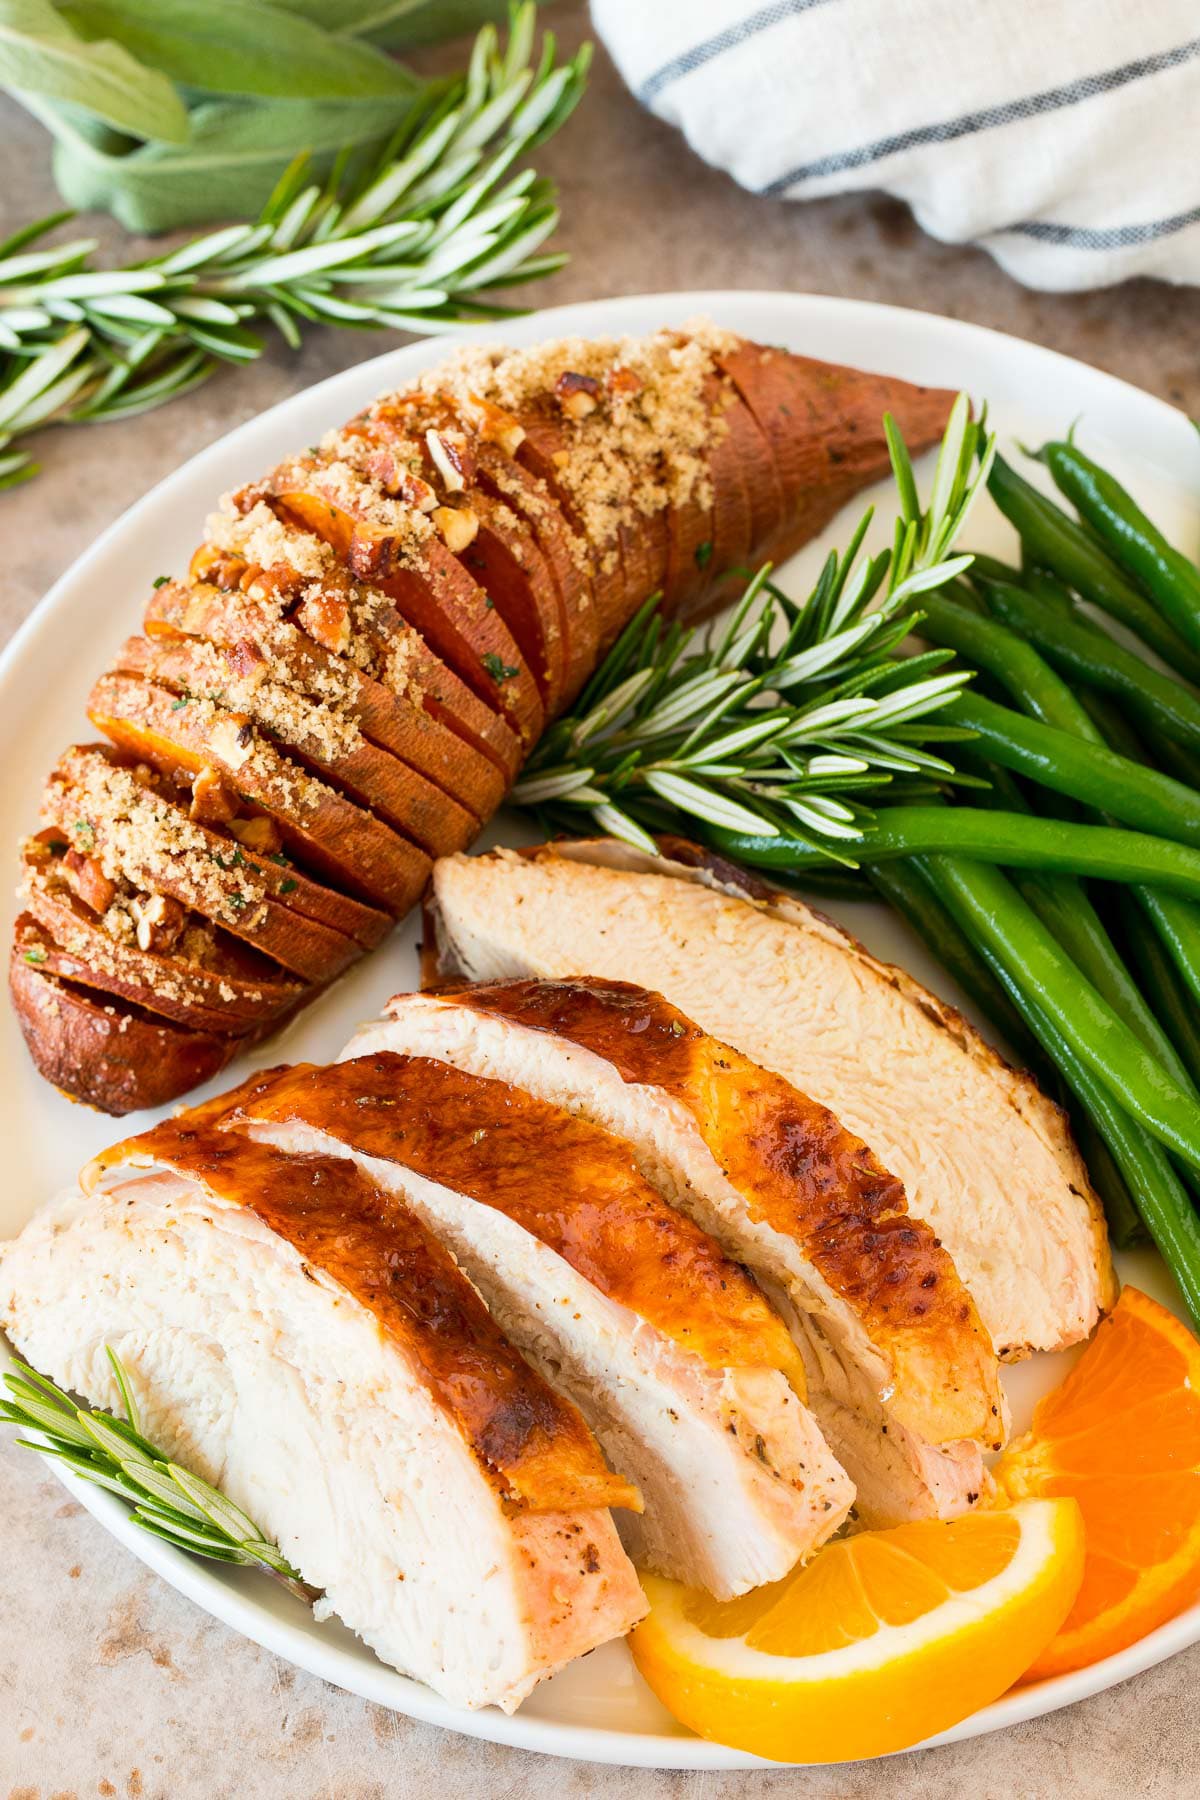 Sliced turkey on a plate with a sweet potato and green beans.